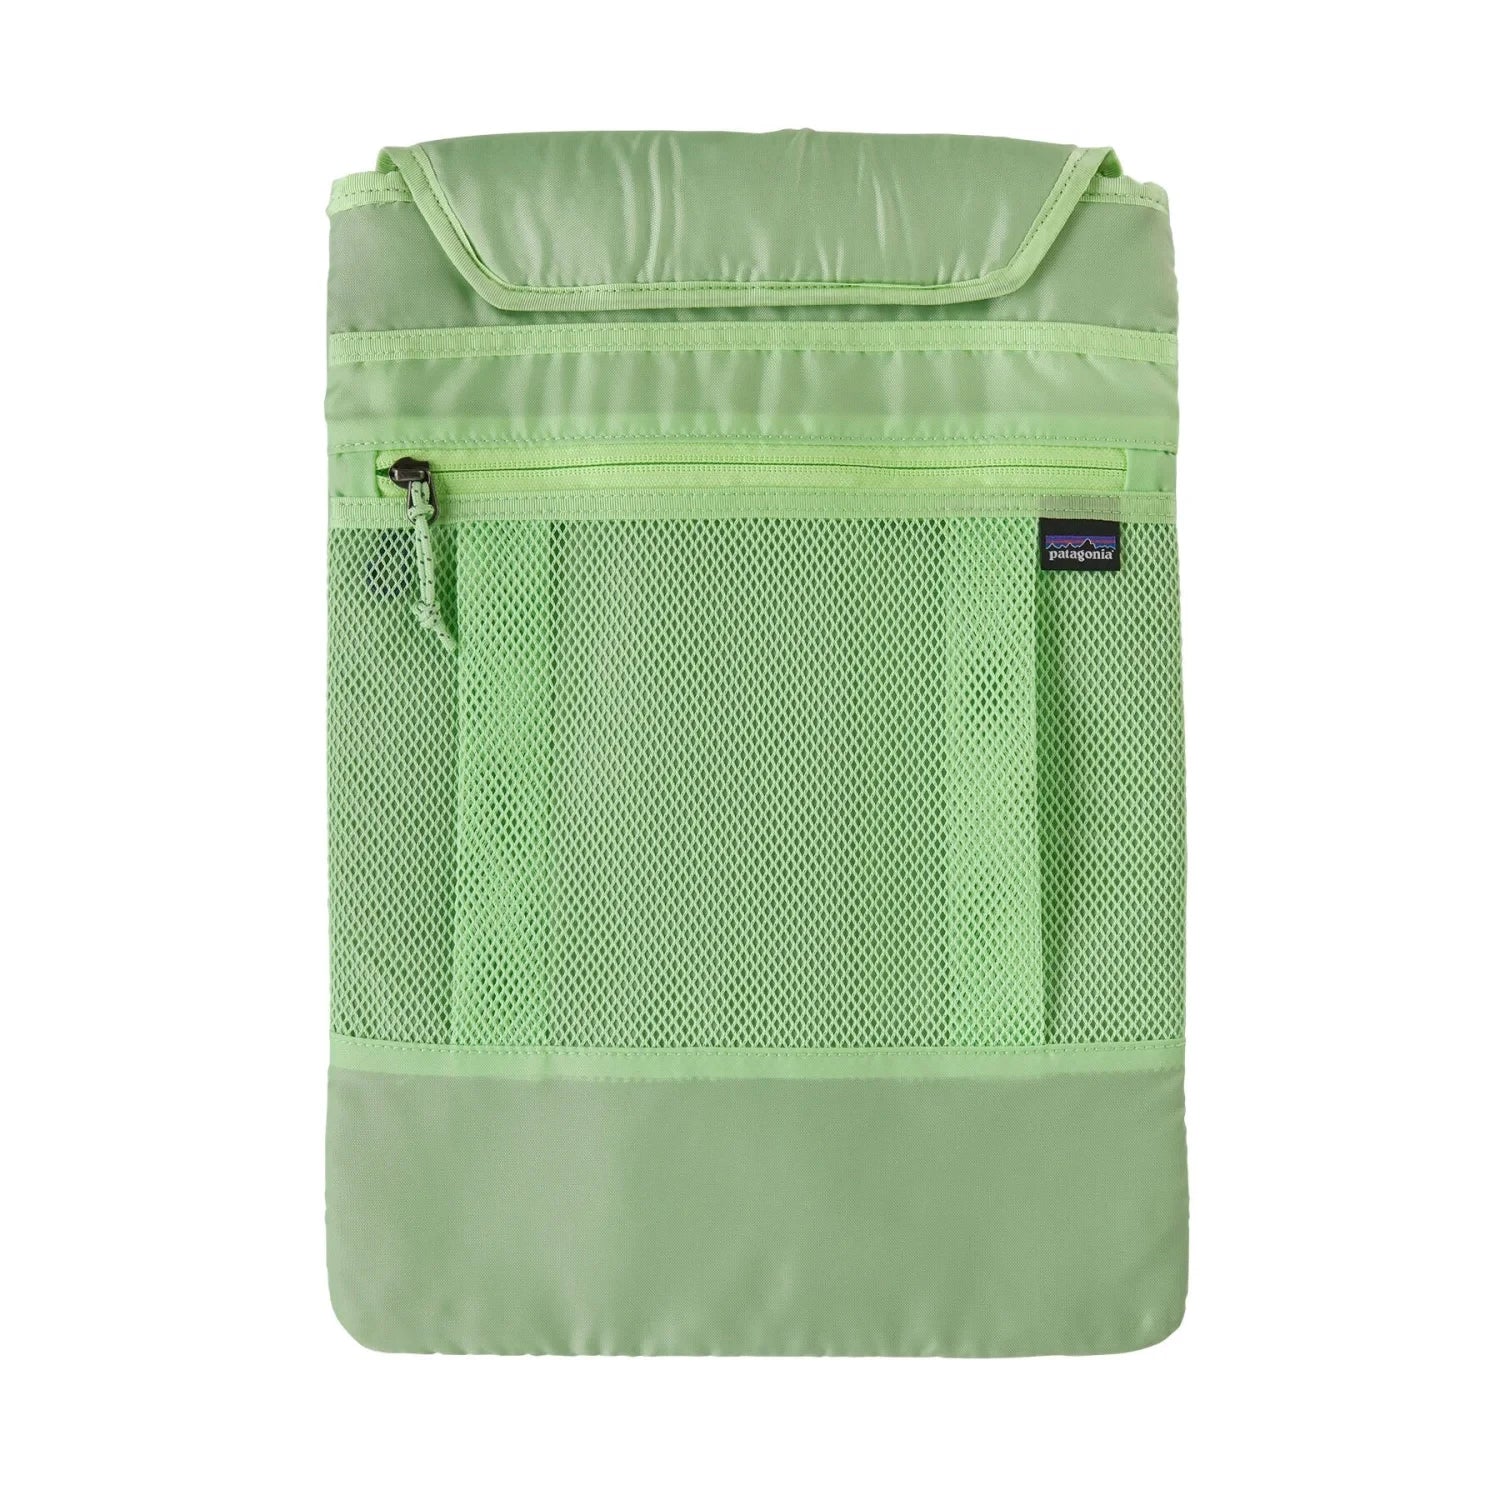 Patagonia 18. PACKS - DAYBAG Refugio Day Pack 26L NUVG NOUVEAU GREEN